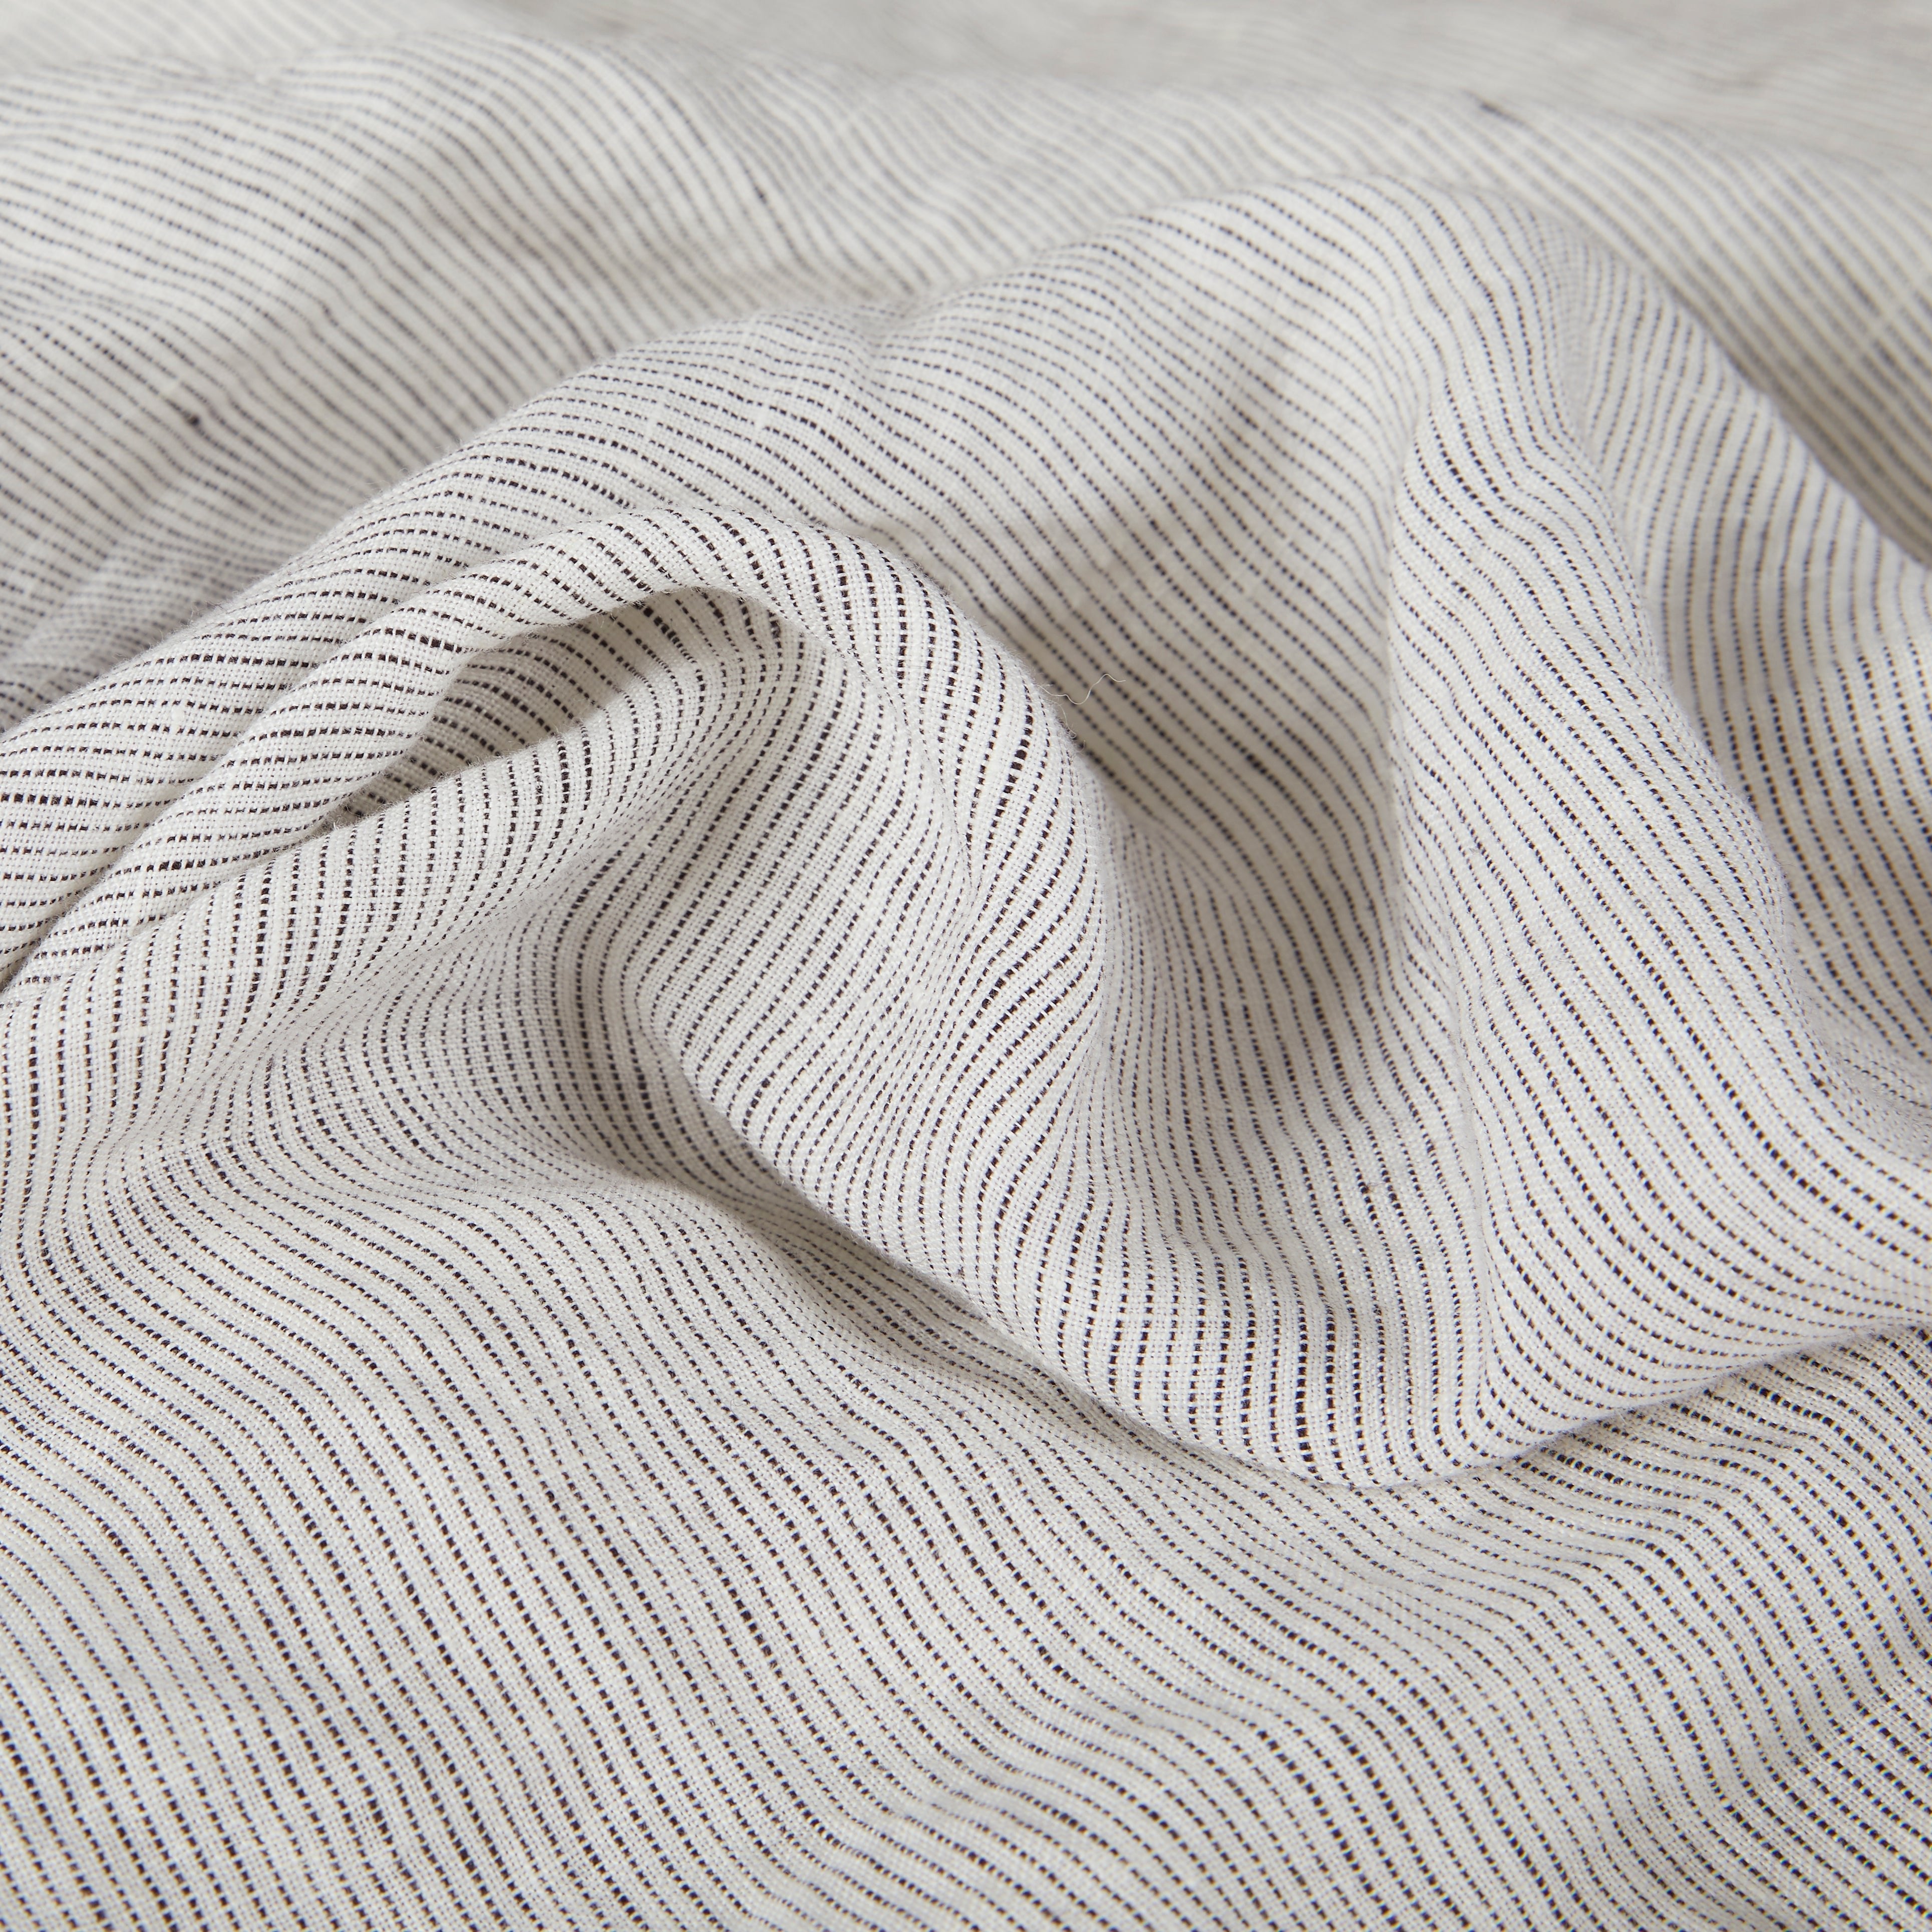 Stonewashed linen bedding gray striped, detail - By Native